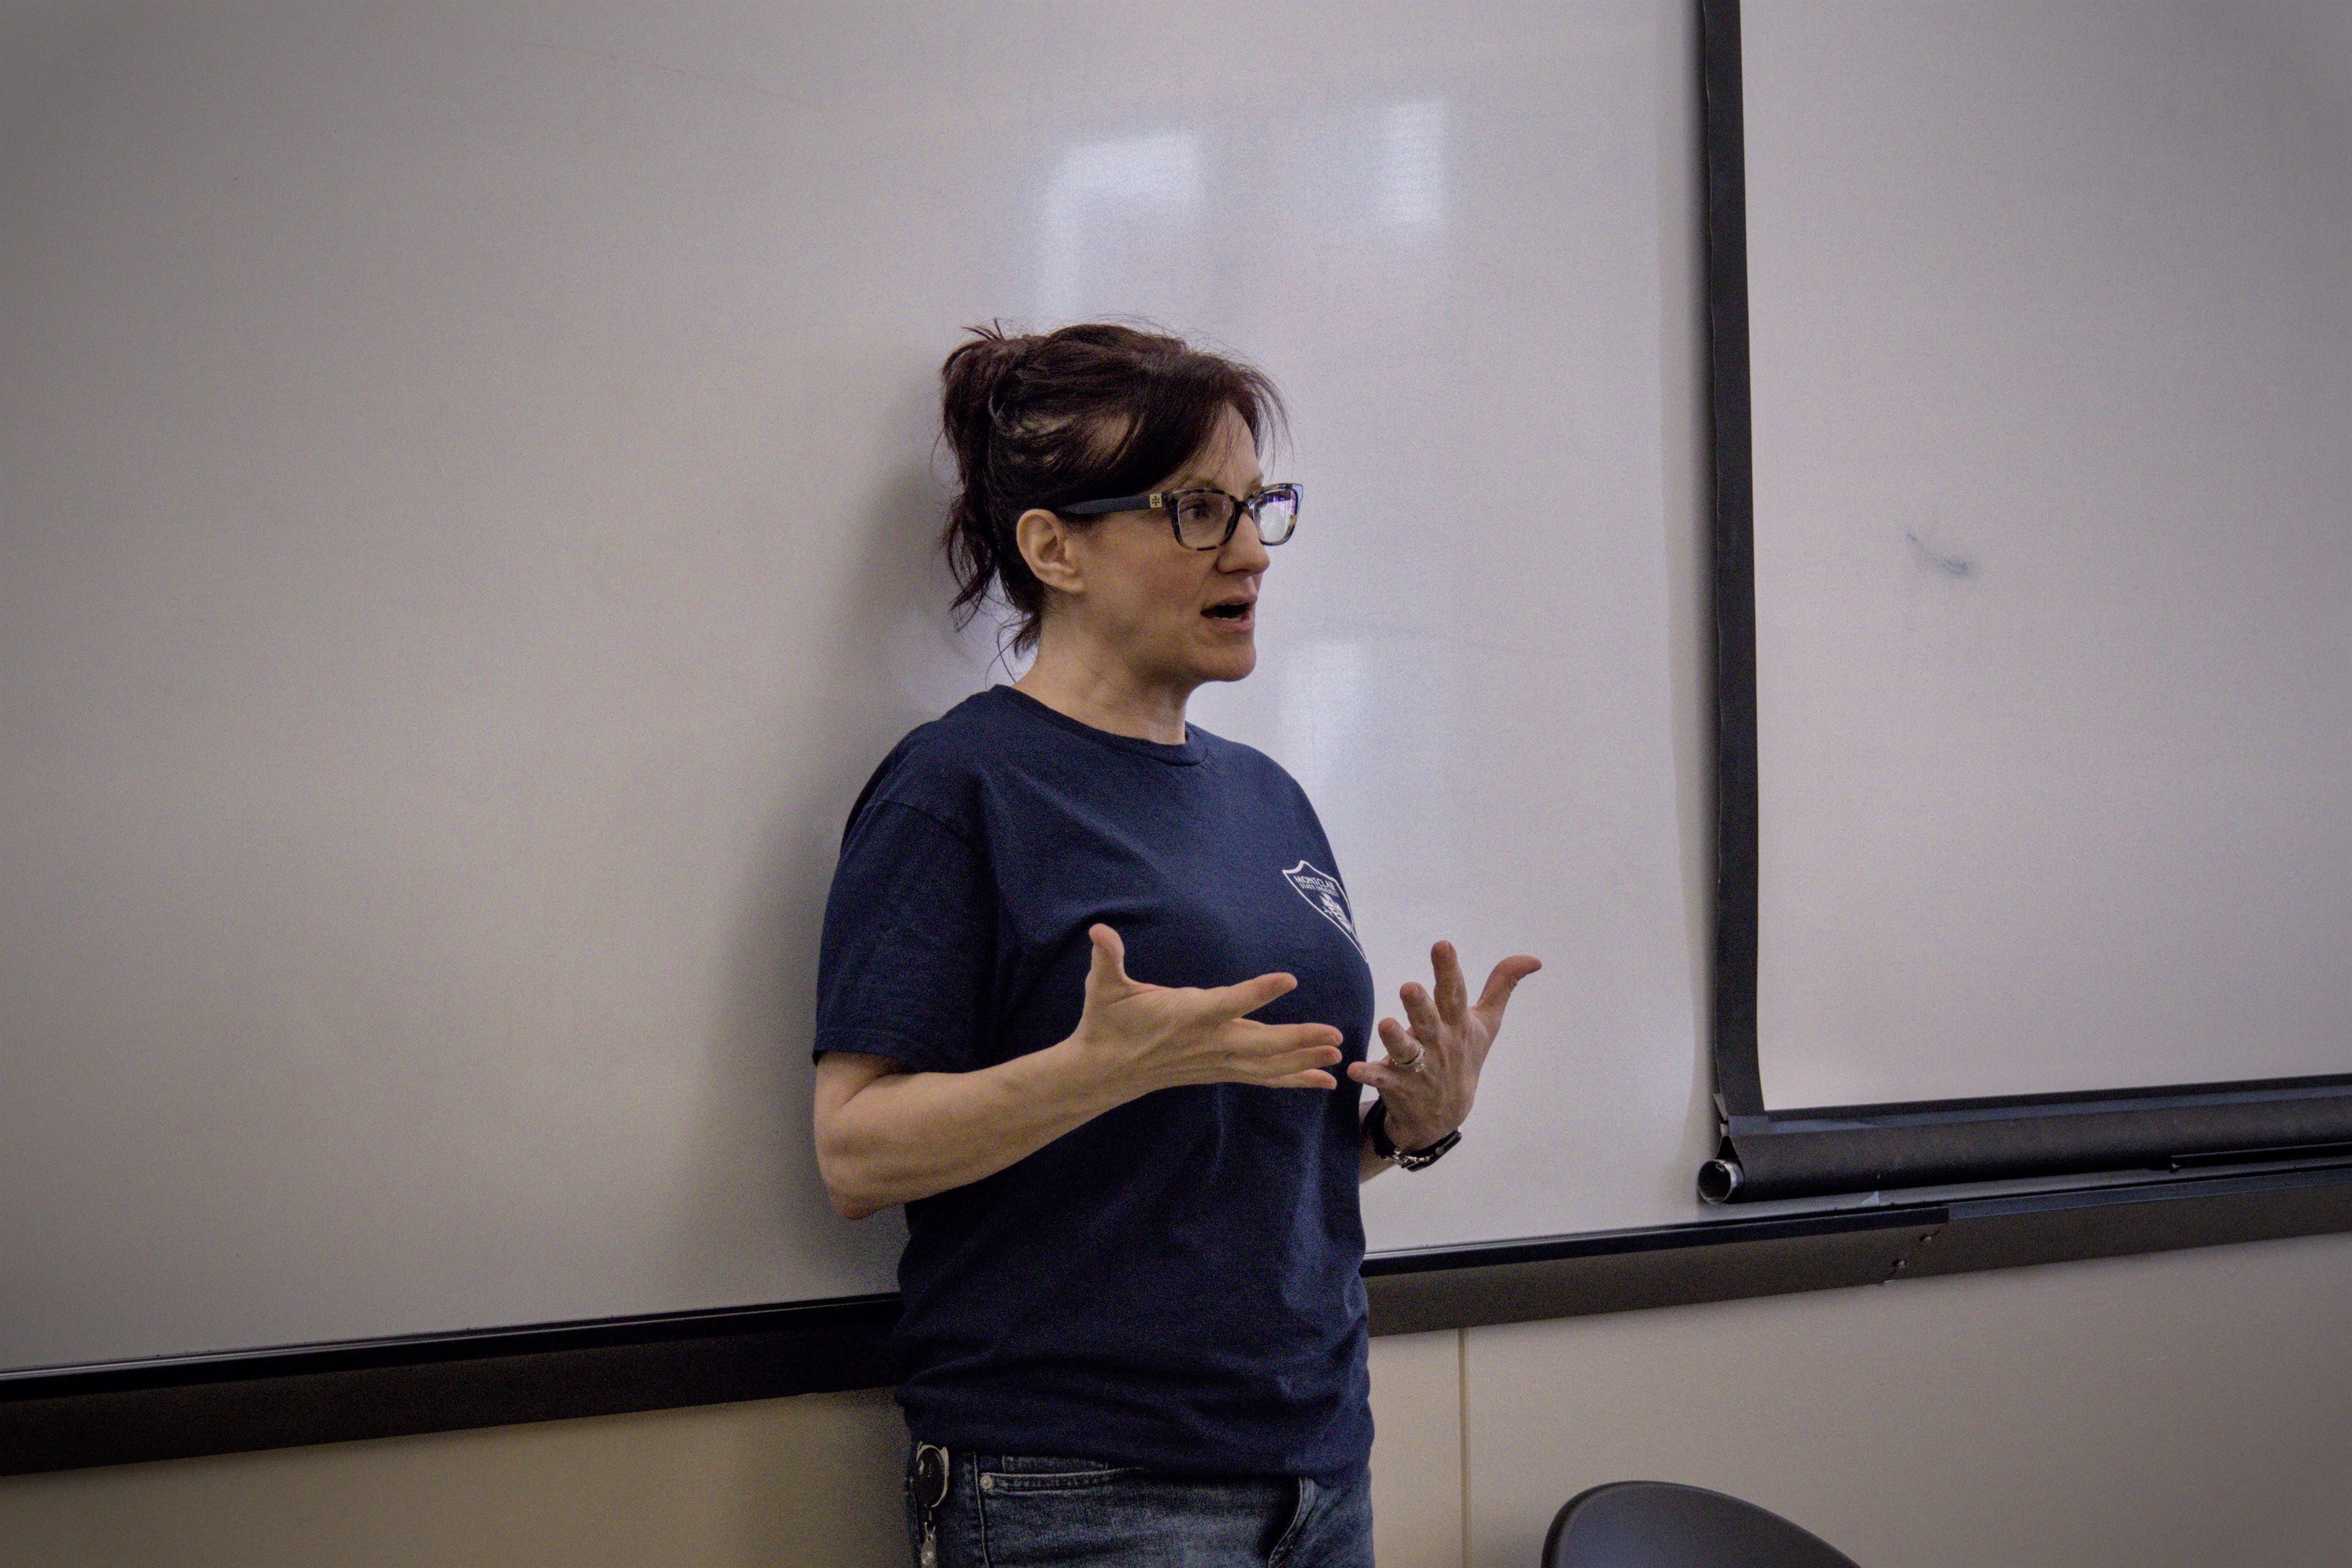 Red-headed woman with brown glasses explains concept to students. She is wearing a blue EMS shirt and blue jeans. Her hands are open to demonstrate while she is explaining.